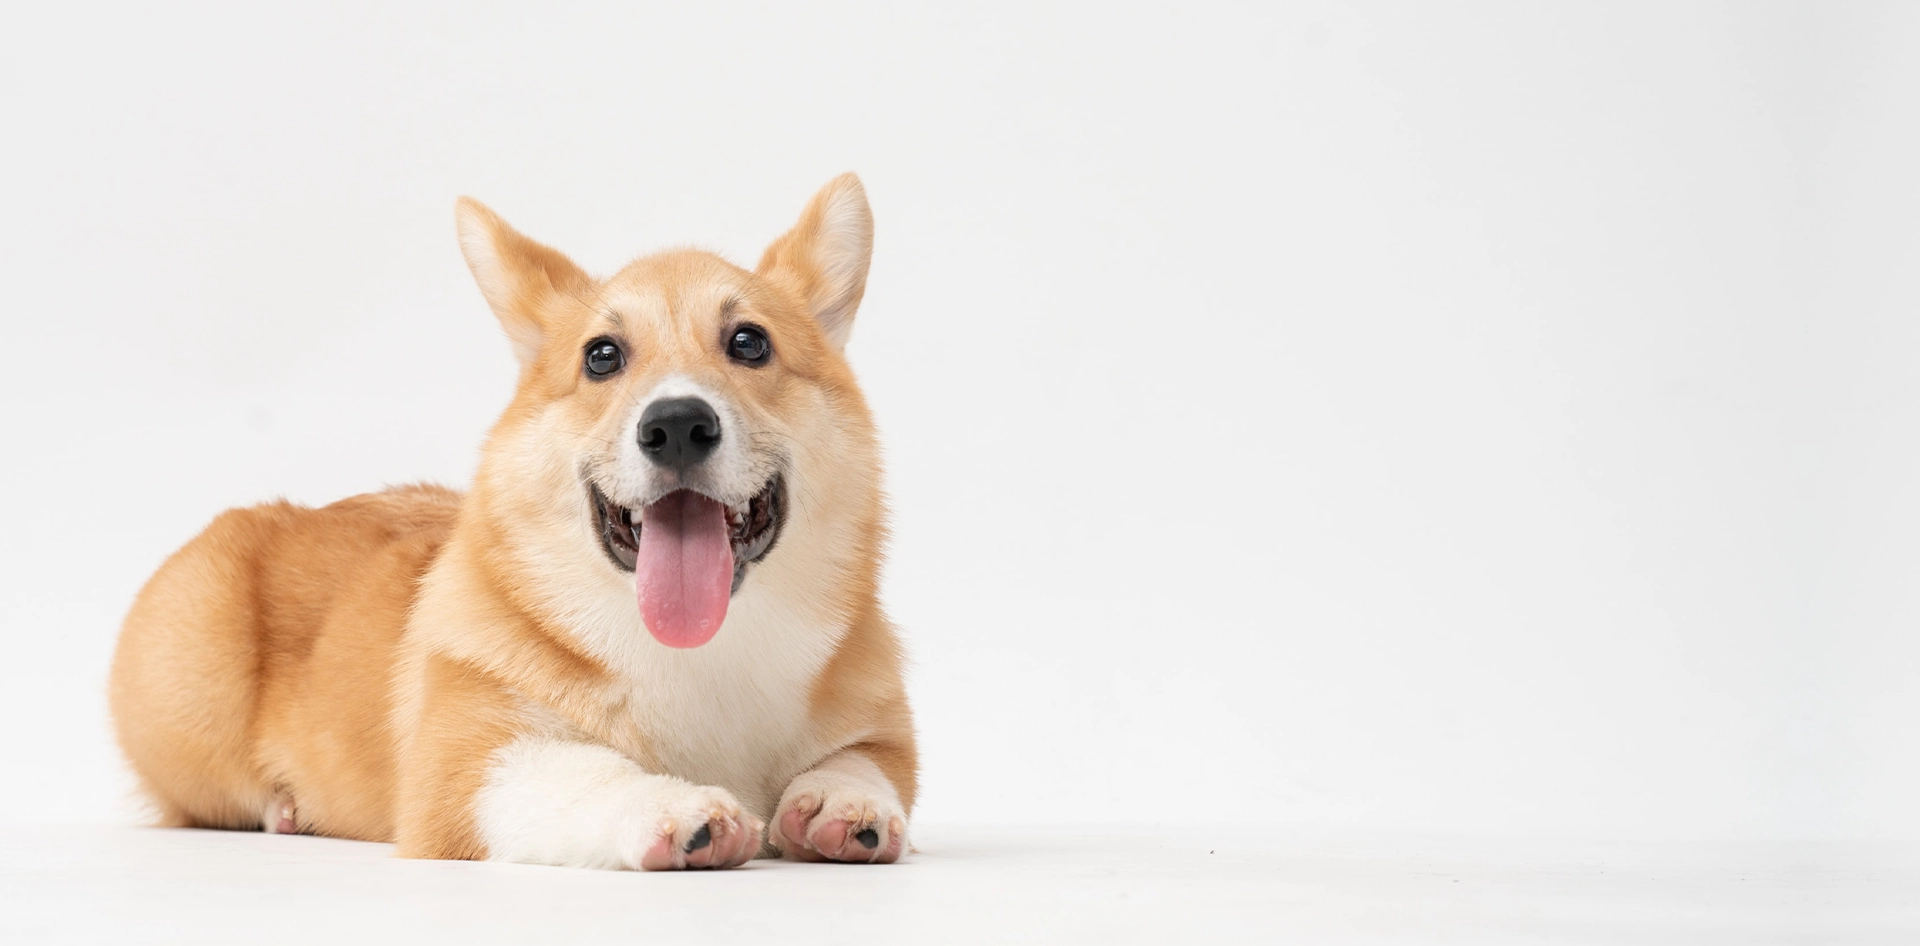 Happy Corgi dog in front of a white background